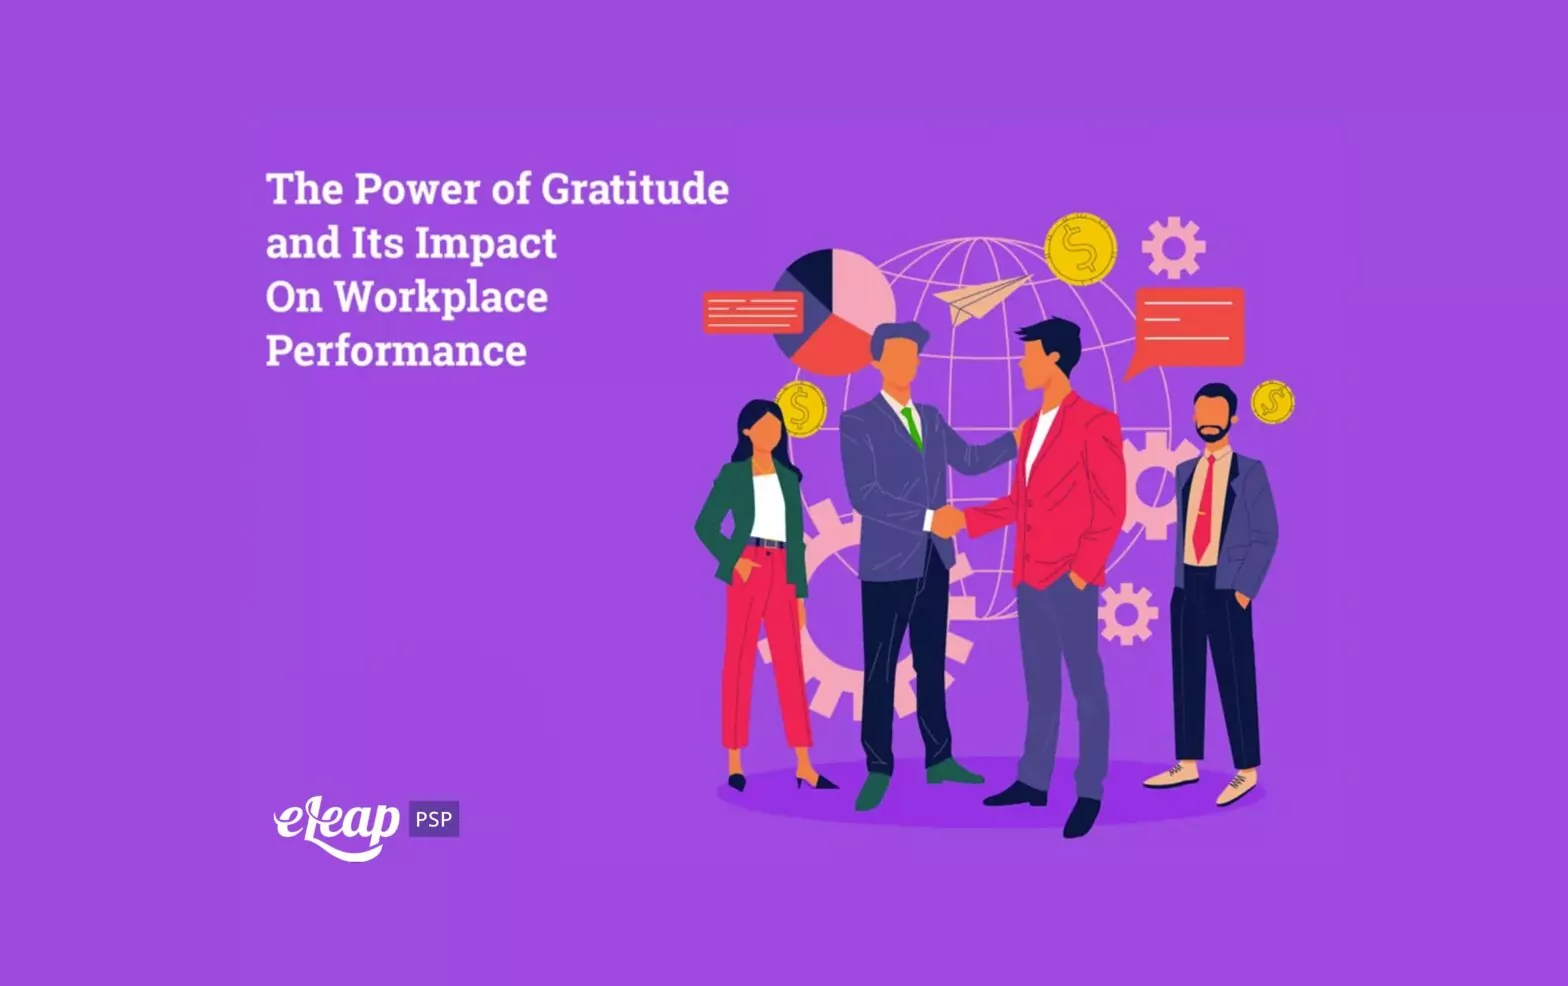 The Power of Gratitude and Its Impact On Workplace Performance